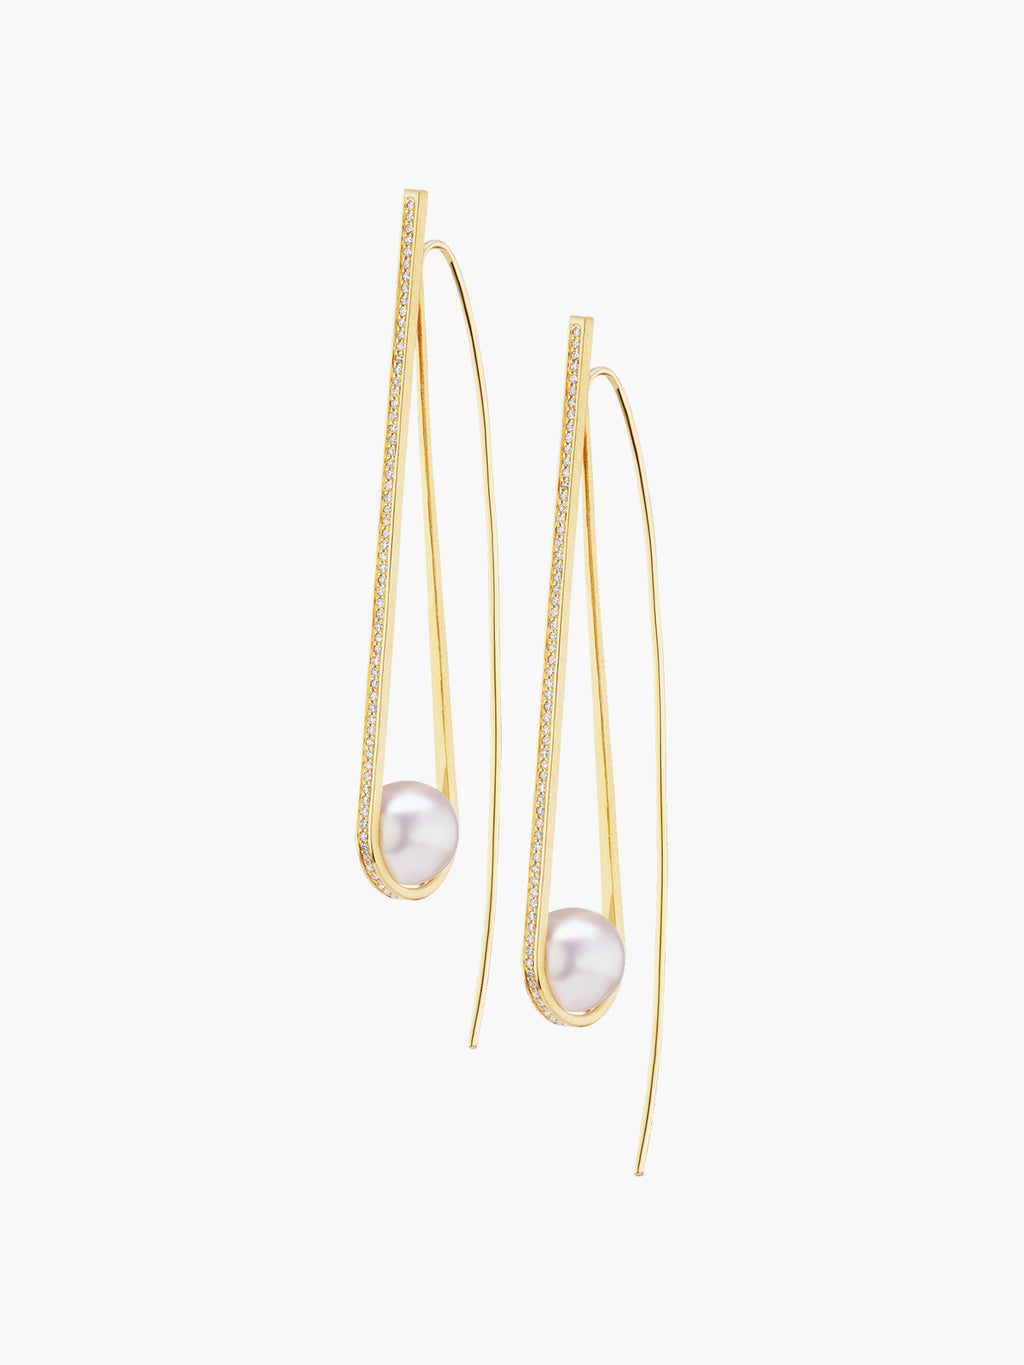 Exclusive Pearl Arc Earring - Fashionkind